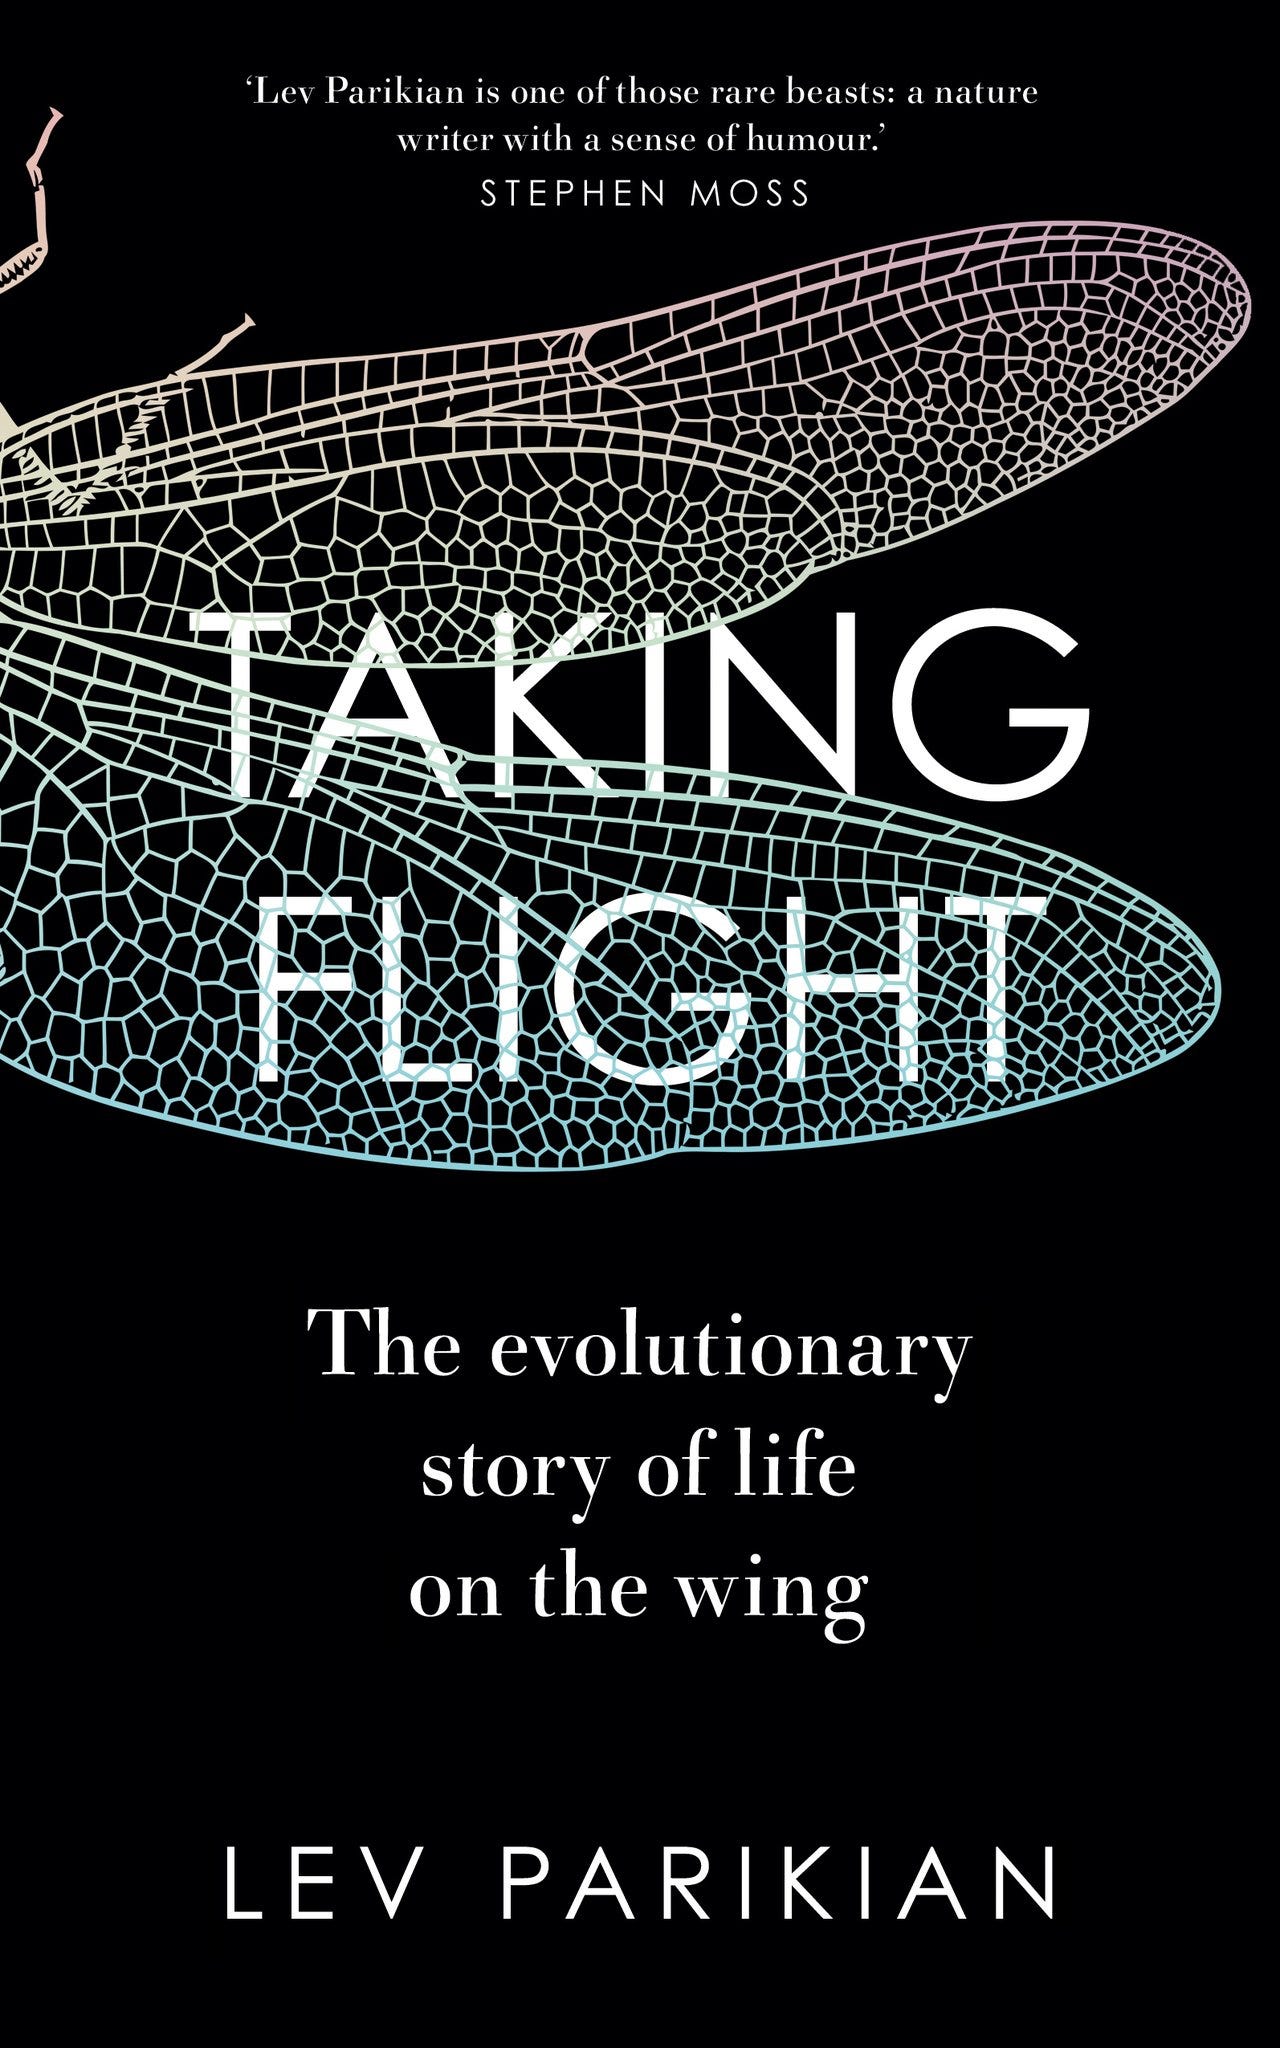 The cover of Taking Flight – black with white lettering (title, author and so forth) and the outline of dragonfly wings.